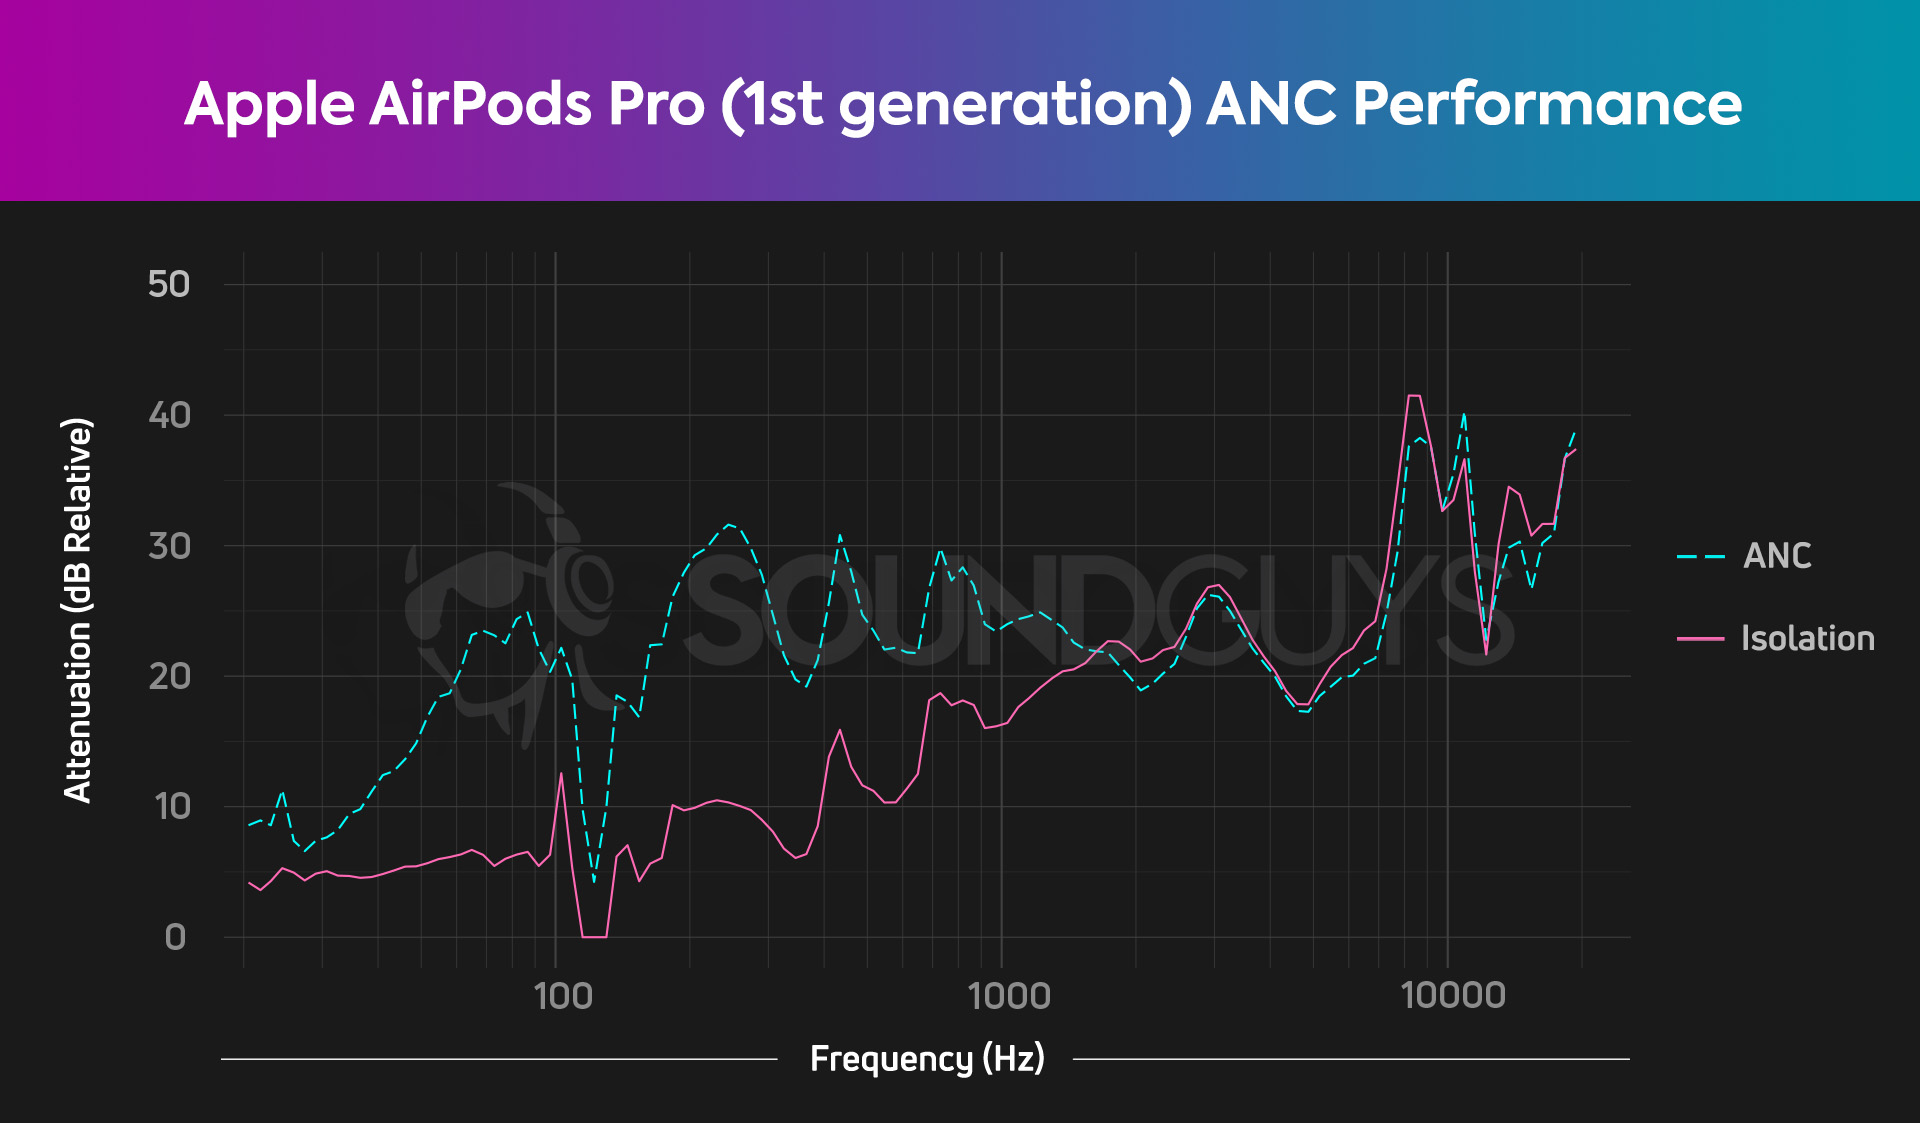 This shows the SoundGuys ANC and isolation chart for the Apple AirPods Pro.